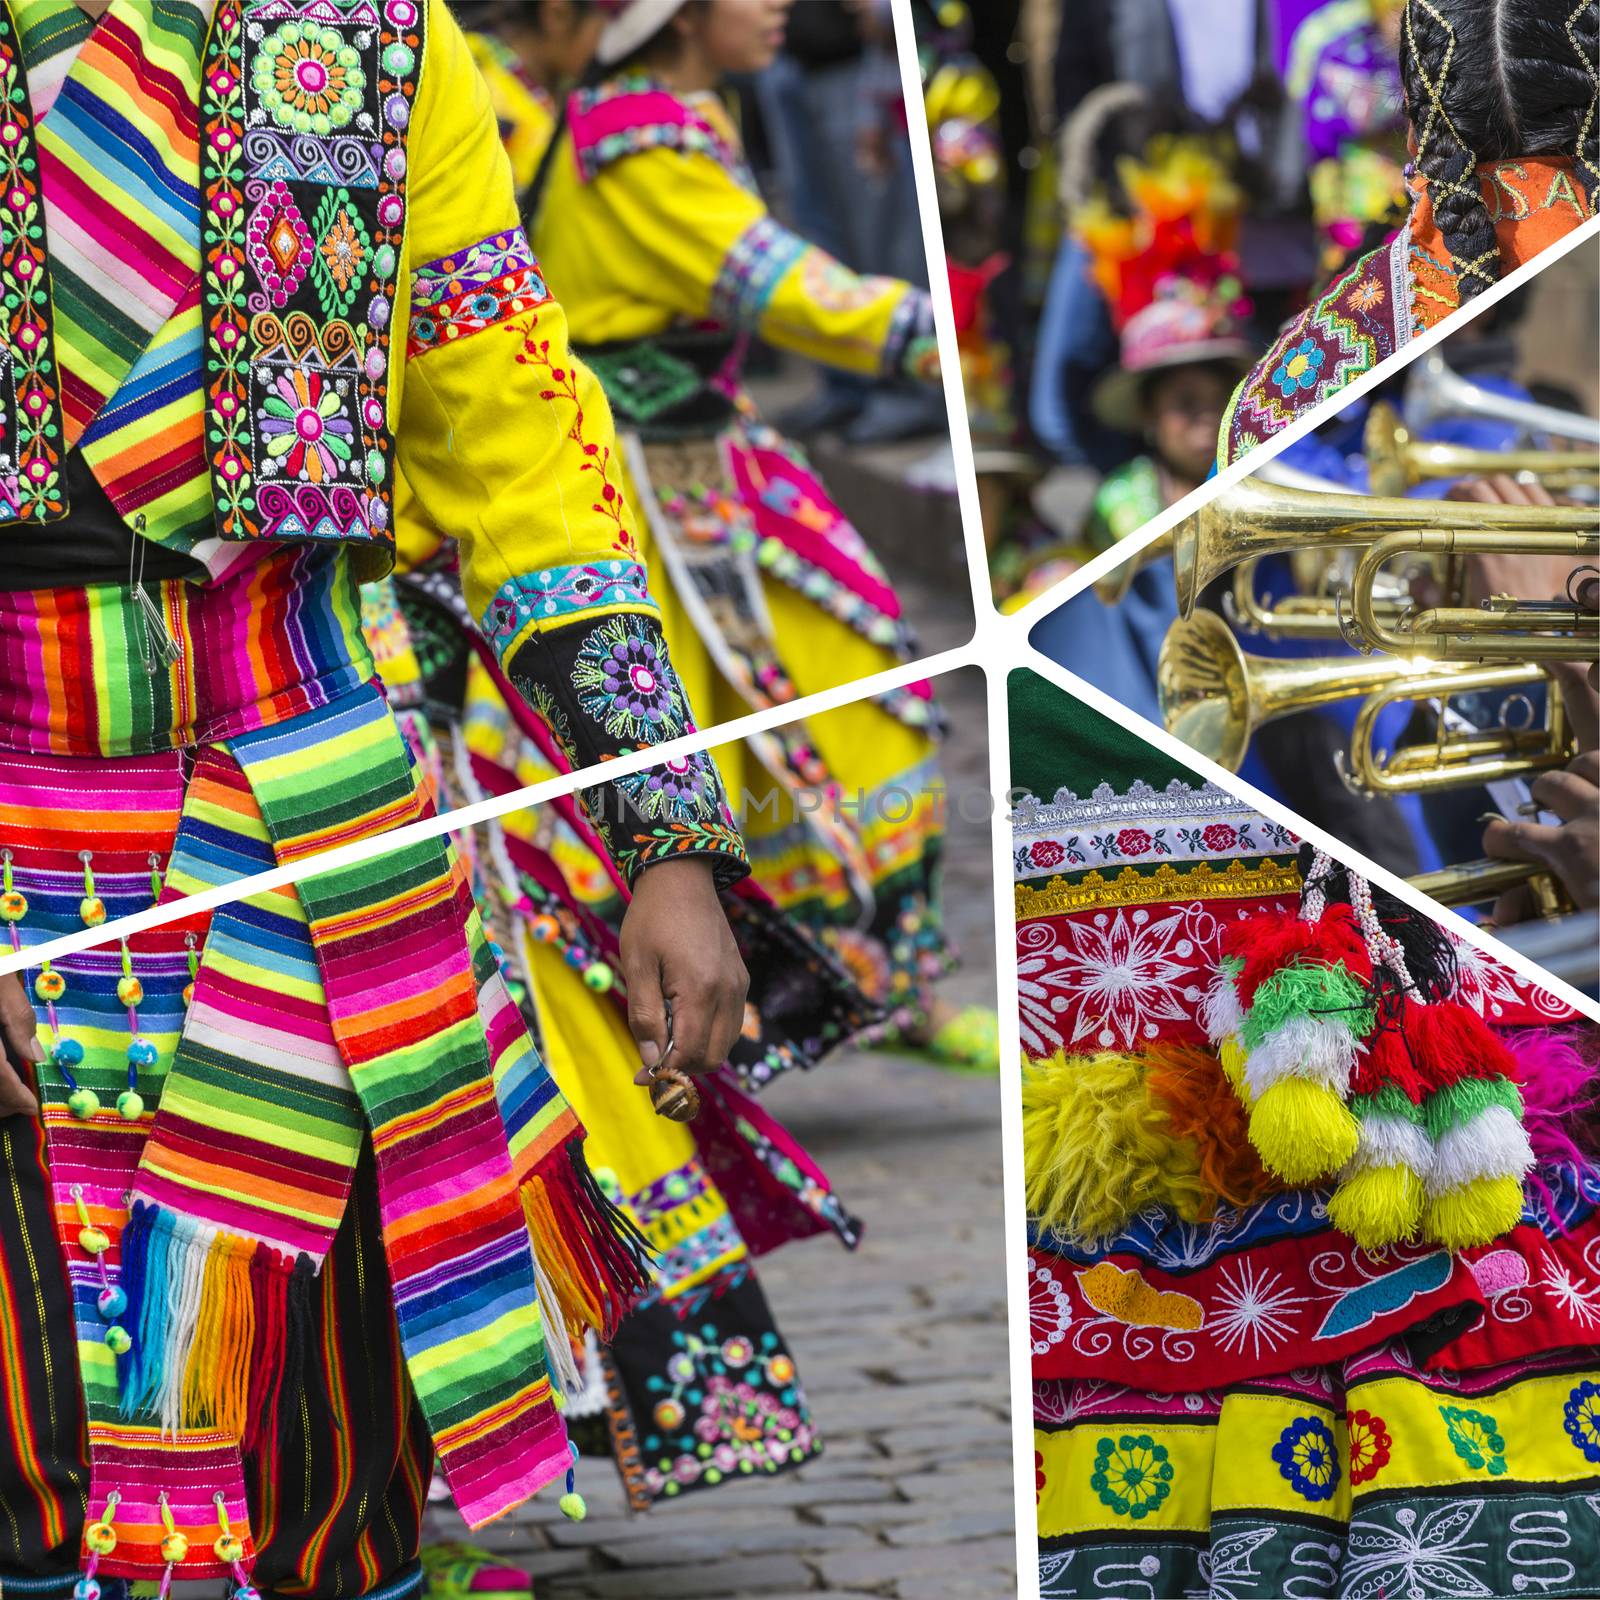 Collage of Peru traditional culture images - travel background (my photos)

